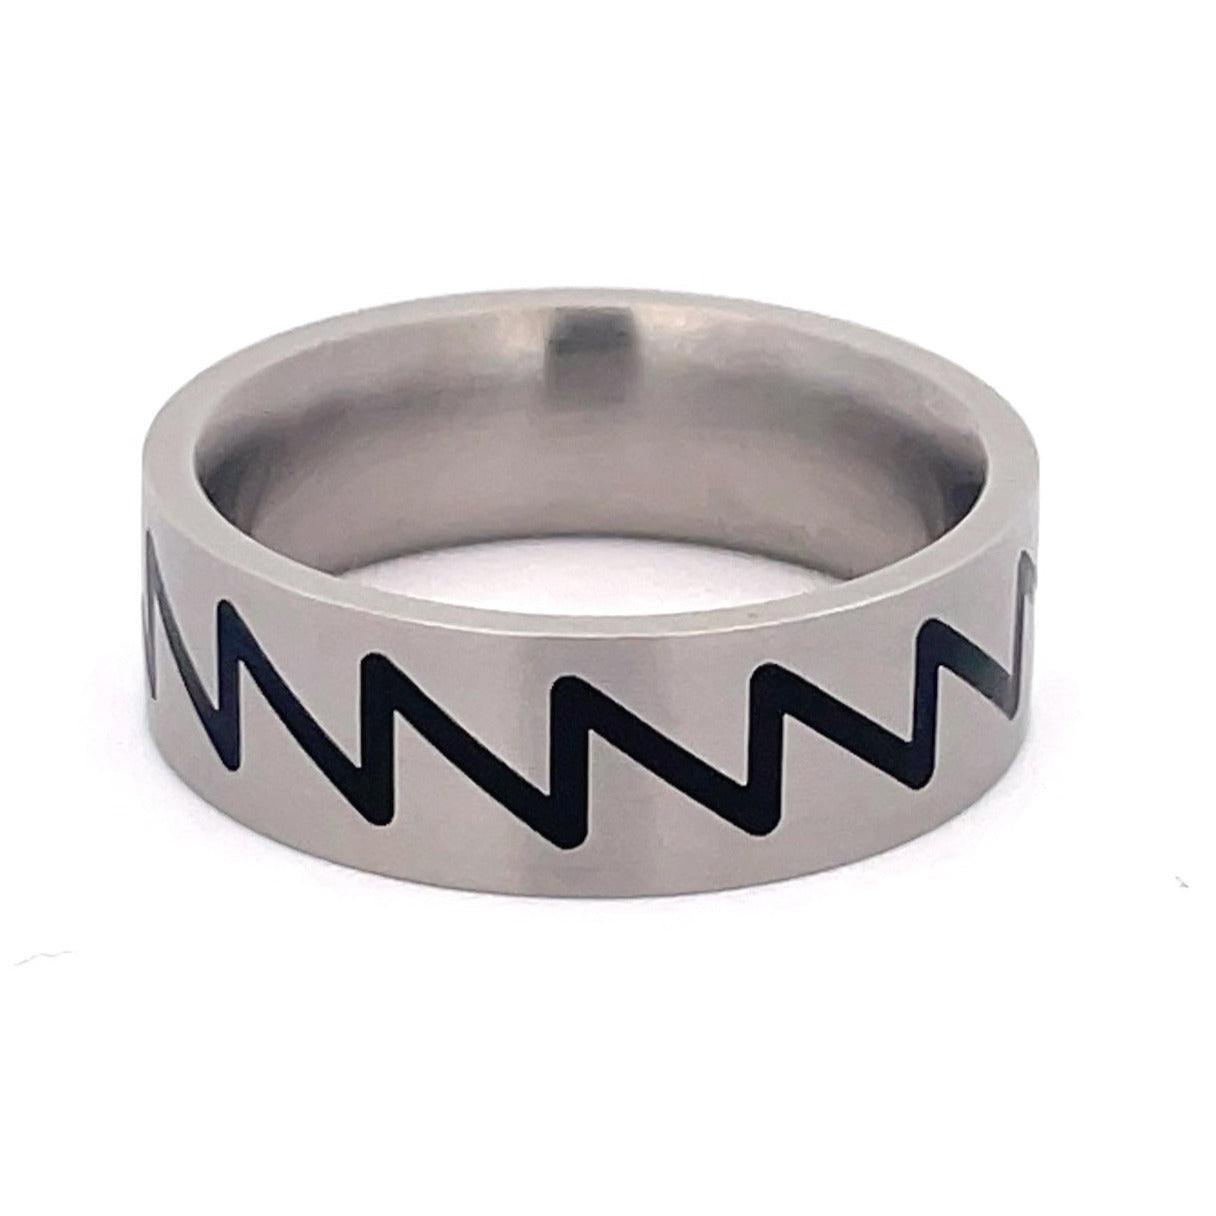 7mm Stainless Steel Black Zig-Zag Ring - Size S